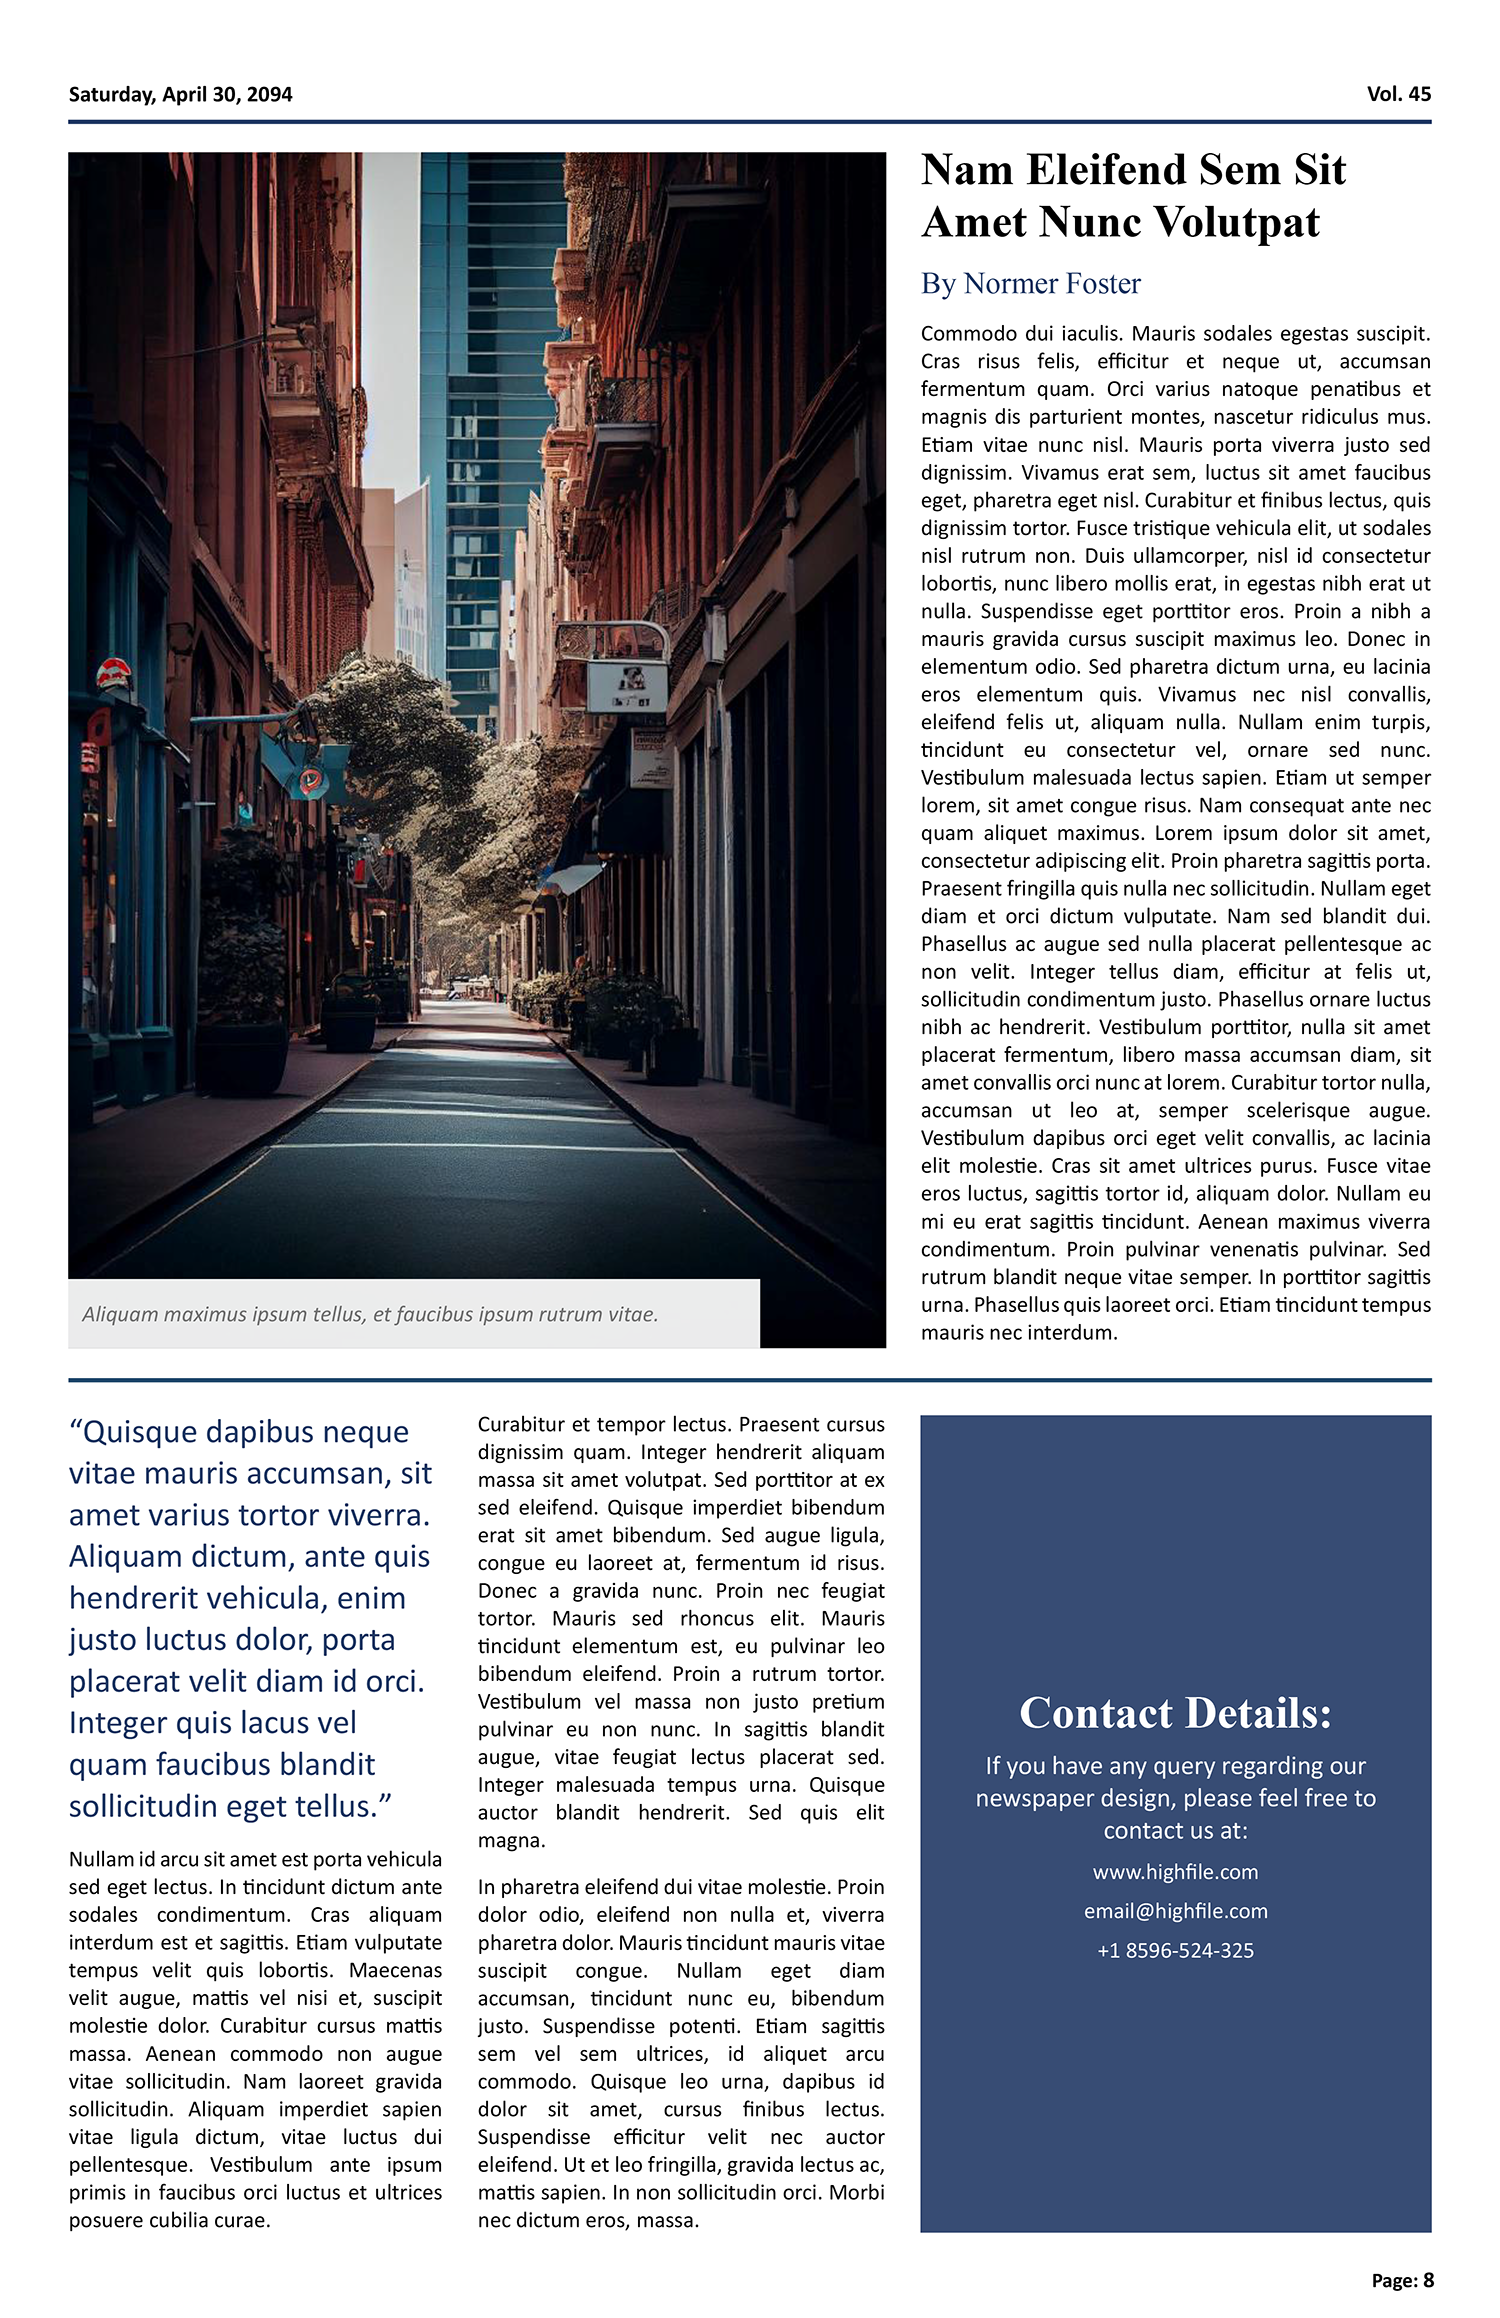 Professional Newspaper Article Template - Page 08